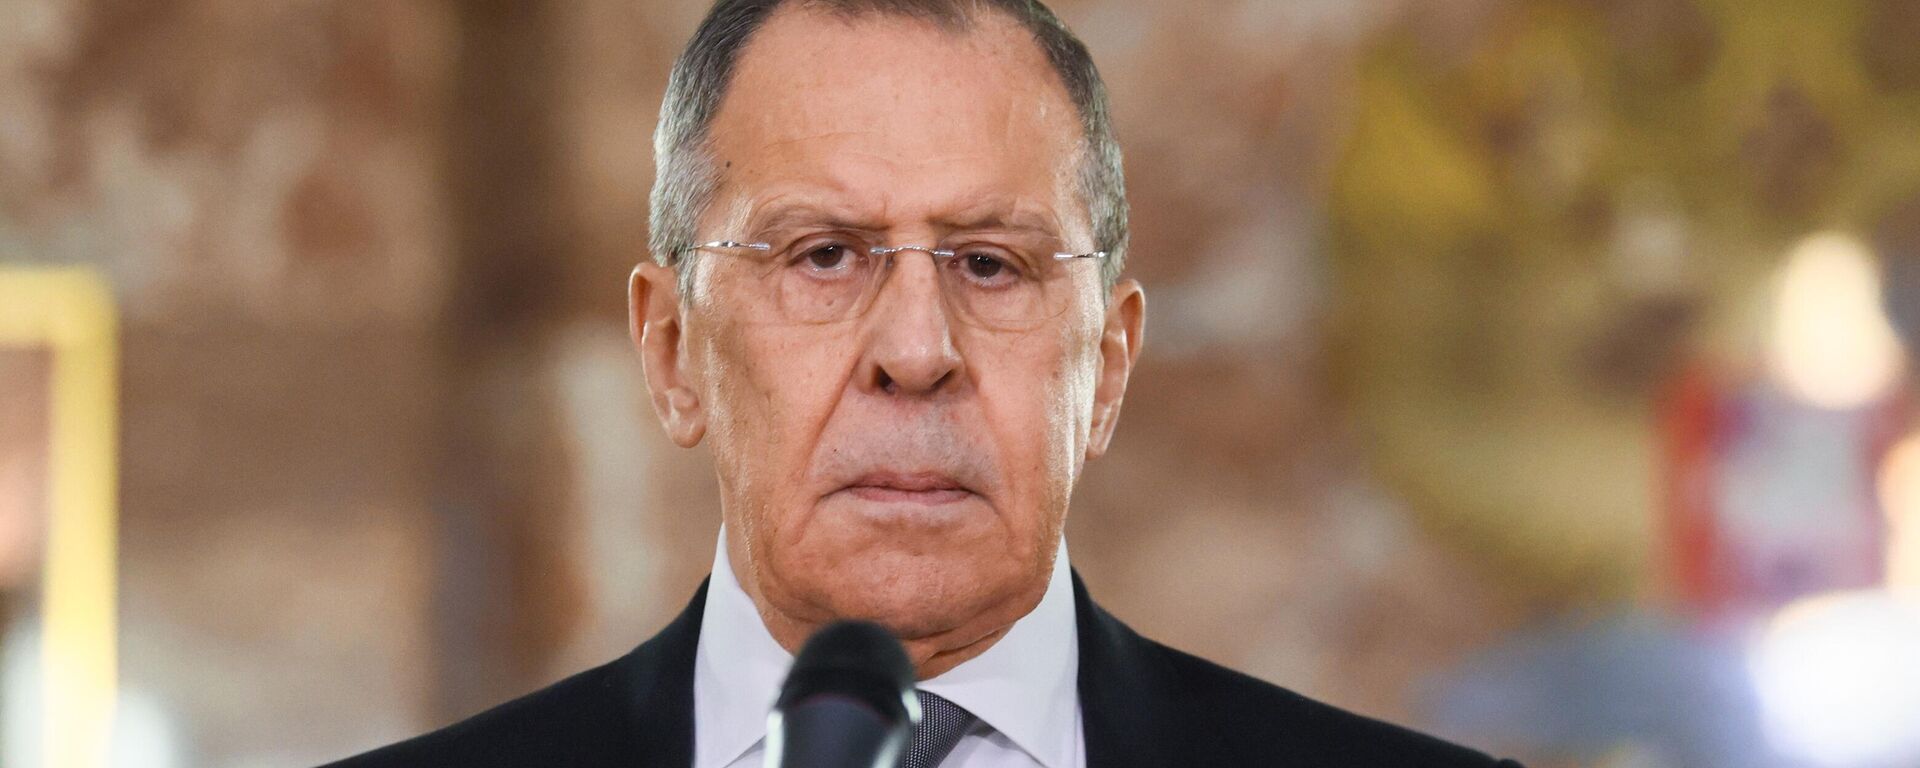 Russian Foreign Minister Sergei Lavrov at a Foreign Ministry ceremony in Moscow on February 10, 2023. - Sputnik International, 1920, 20.03.2023